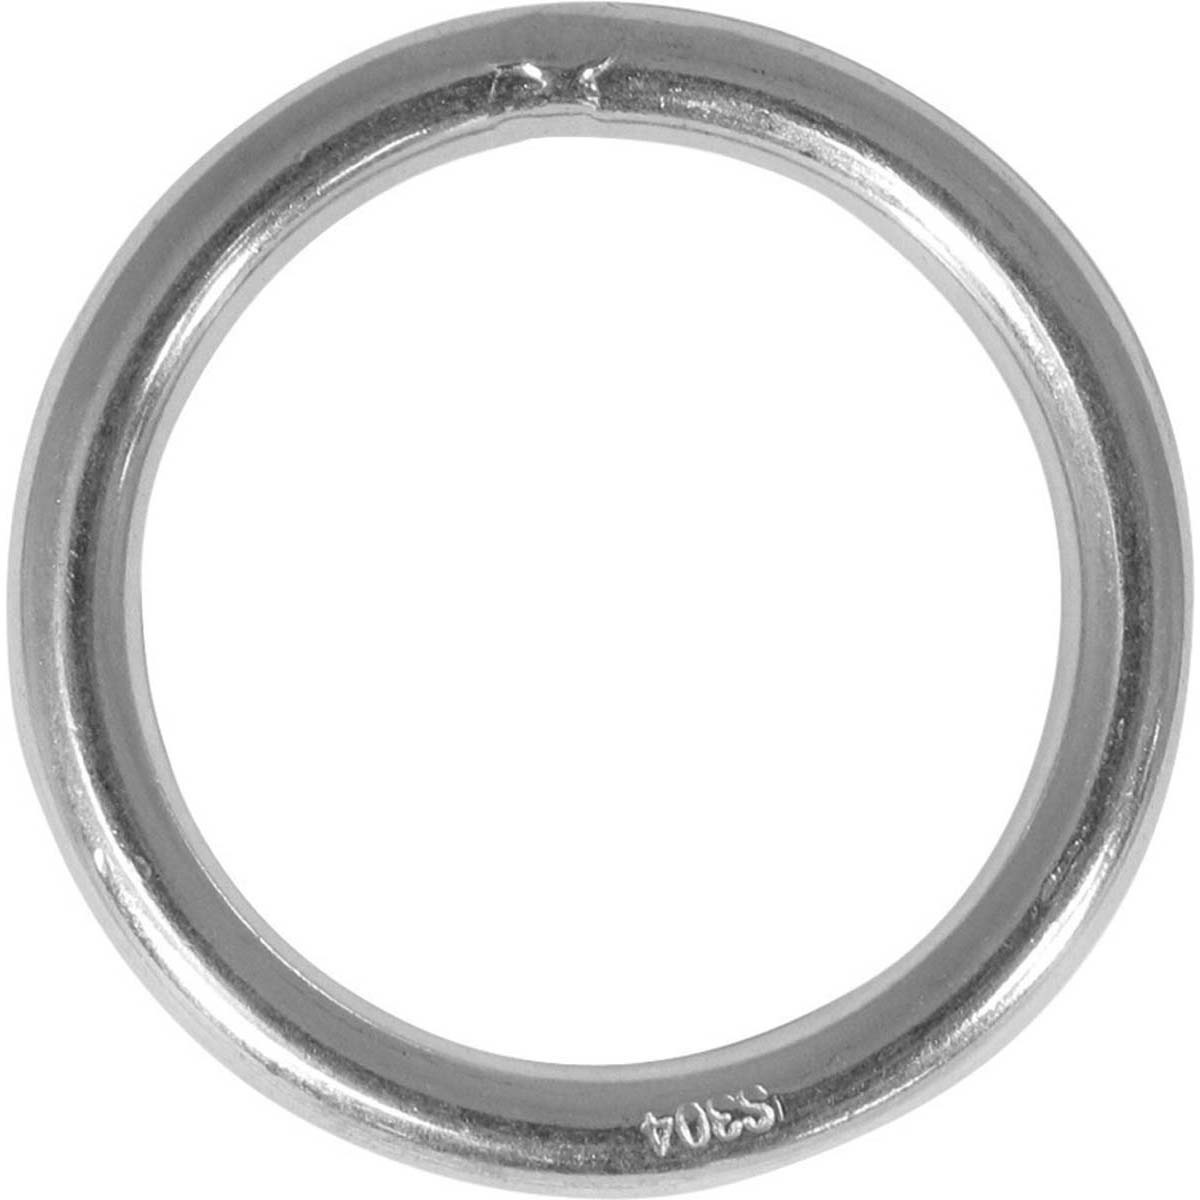 Blueline Stainless Steel Ring 8x50mm